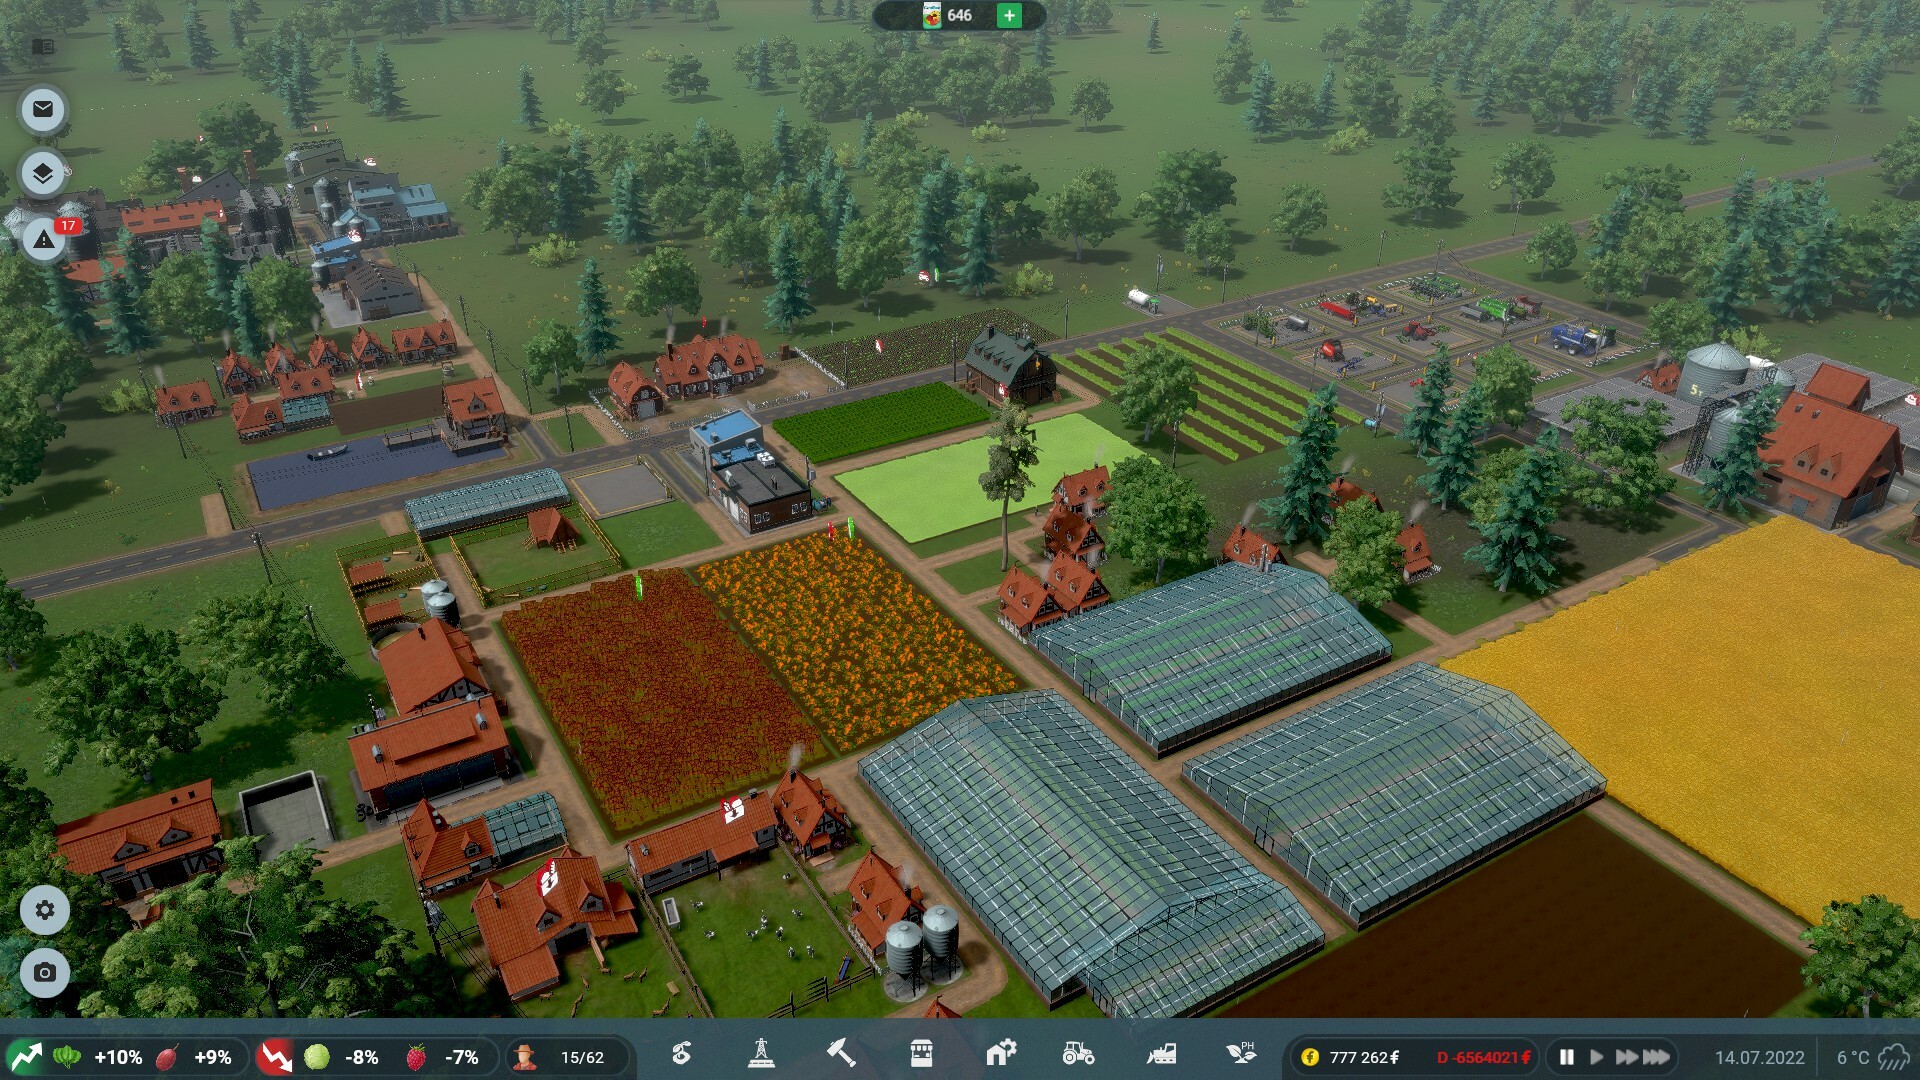 Farm Manager 2022 is the second instalment of popular farming